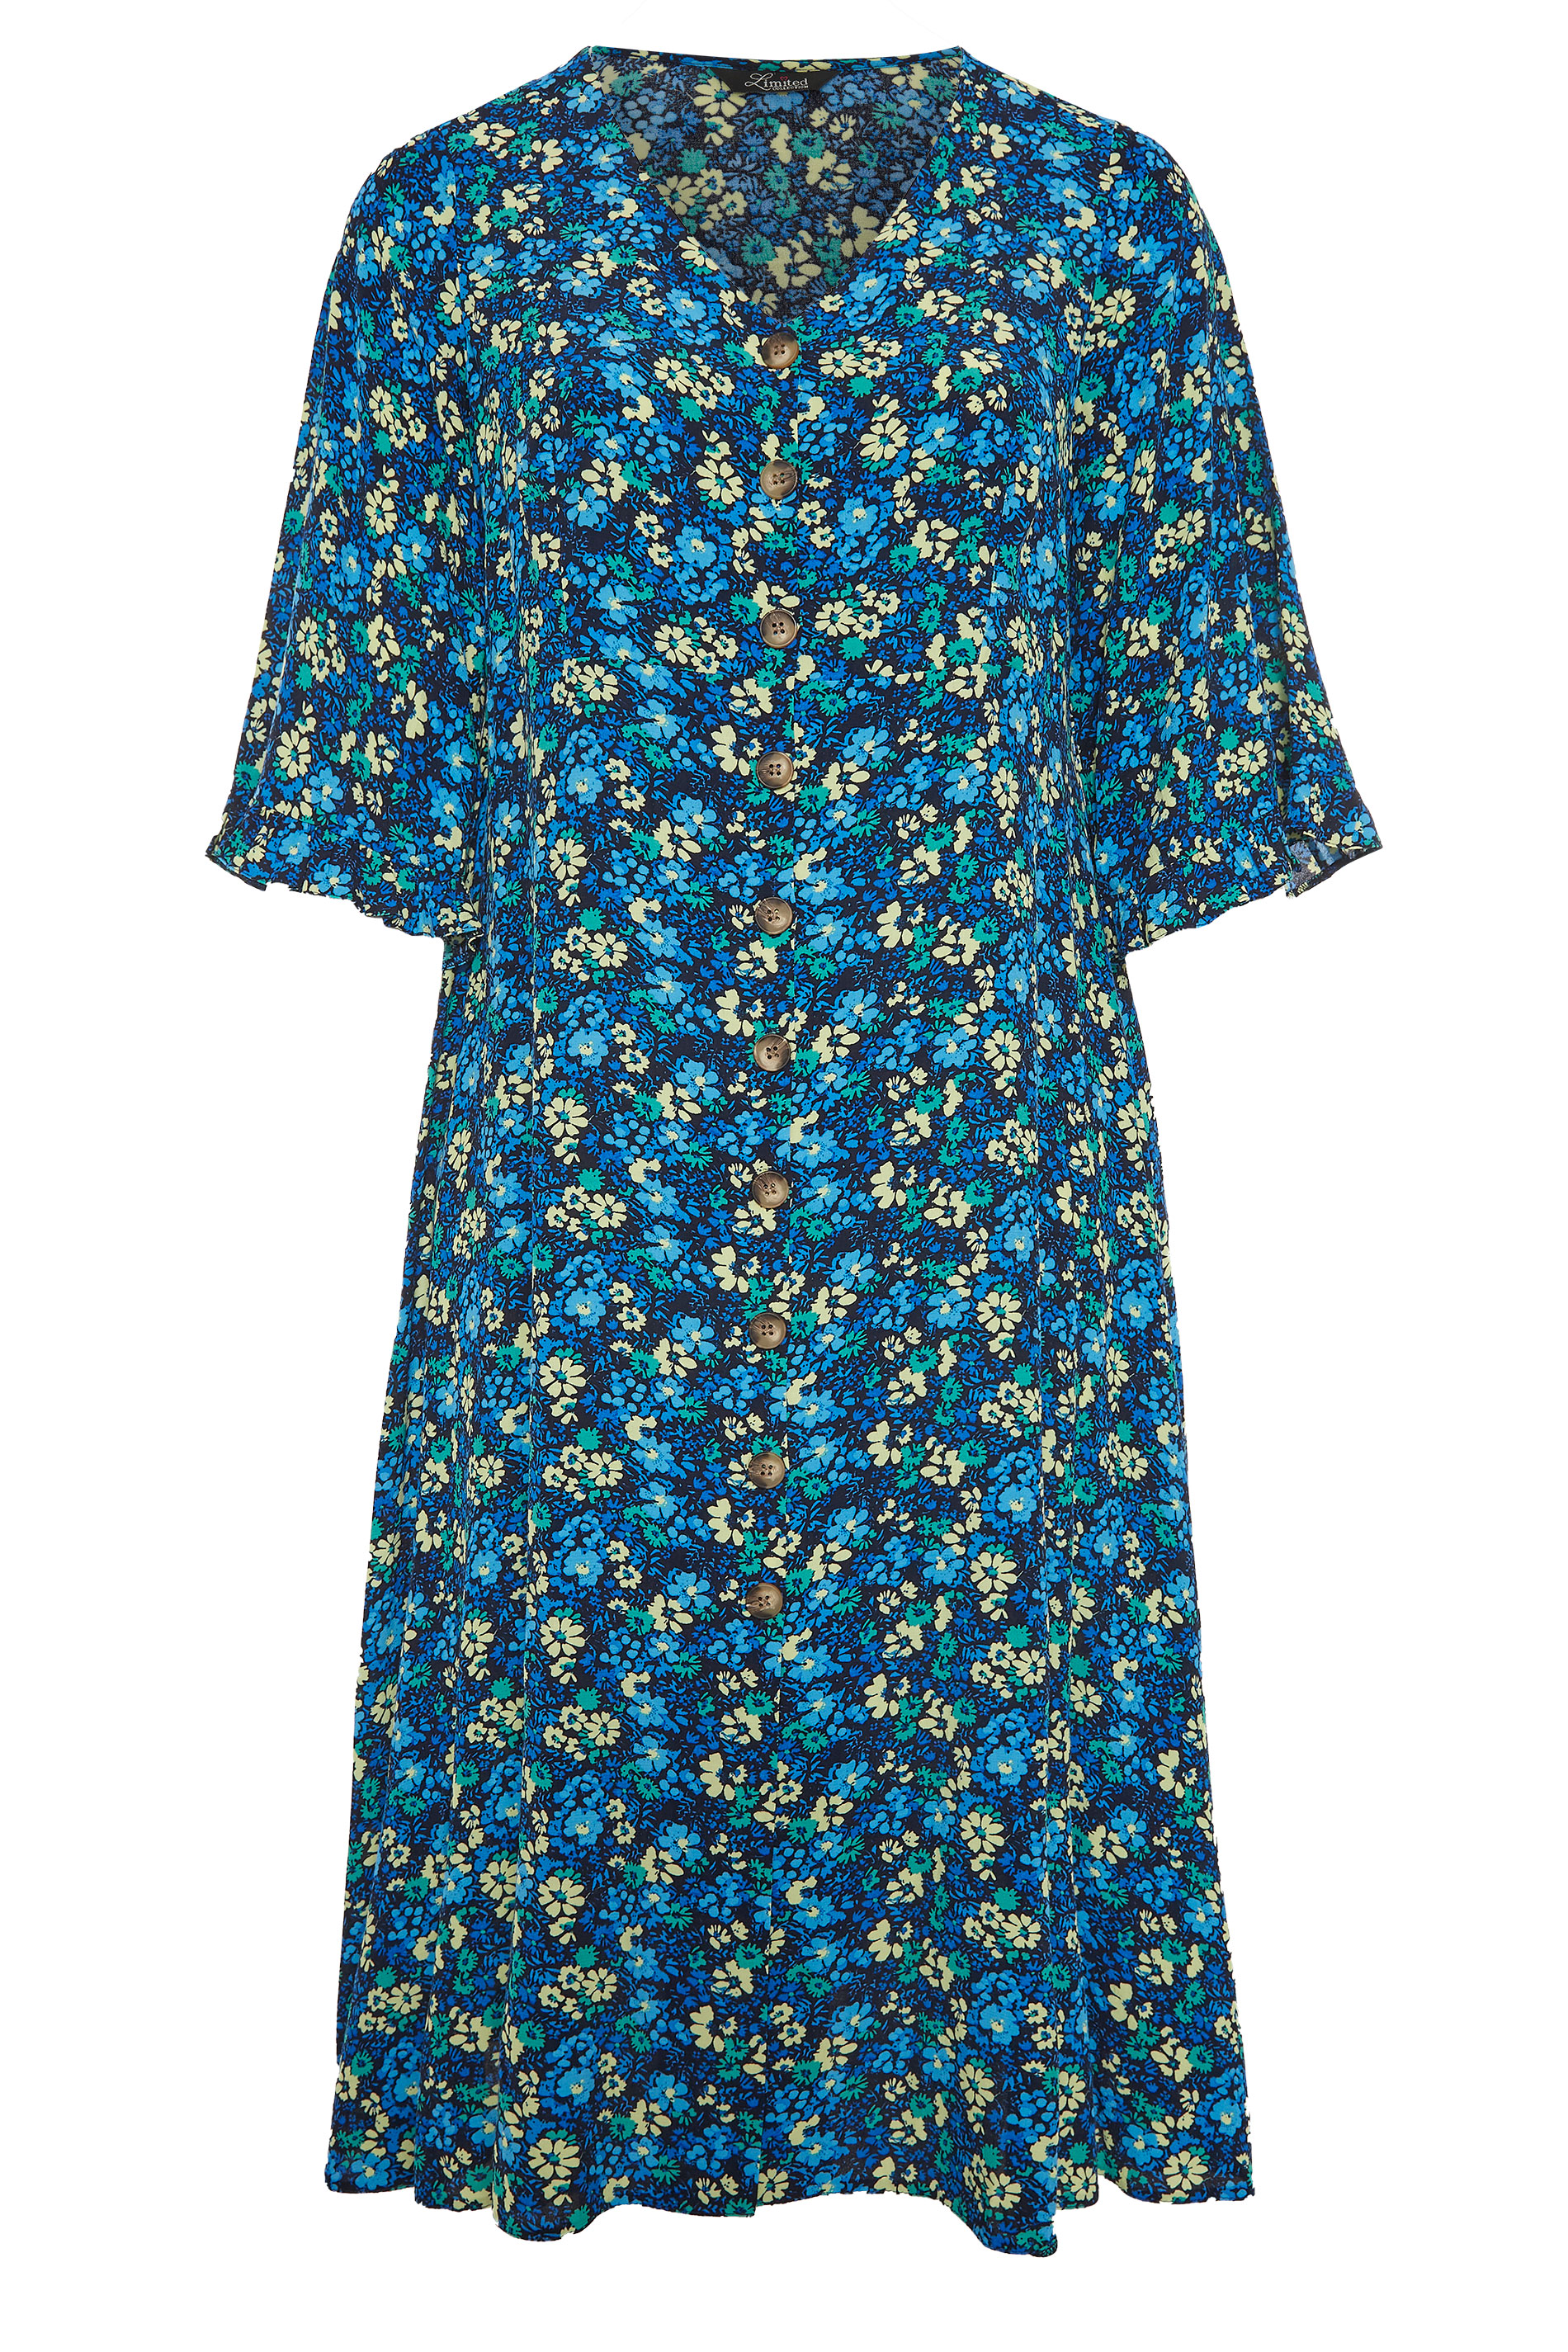 Plus Size THE LIMITED EDIT Blue Floral Midaxi Dress | Yours Clothing